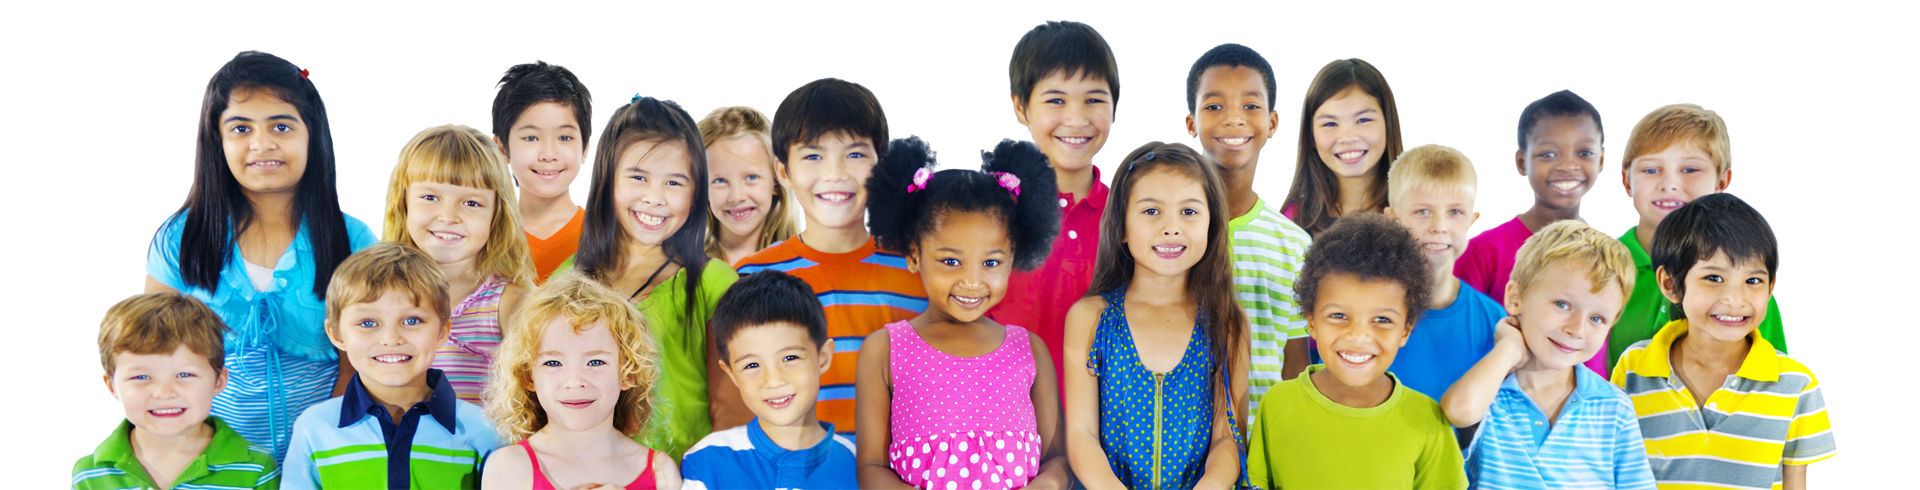 Find approved providers of orthodontic treatment with braces for kids on public aid, medicaid, medical card, tarjeta medica and all kids in illinois